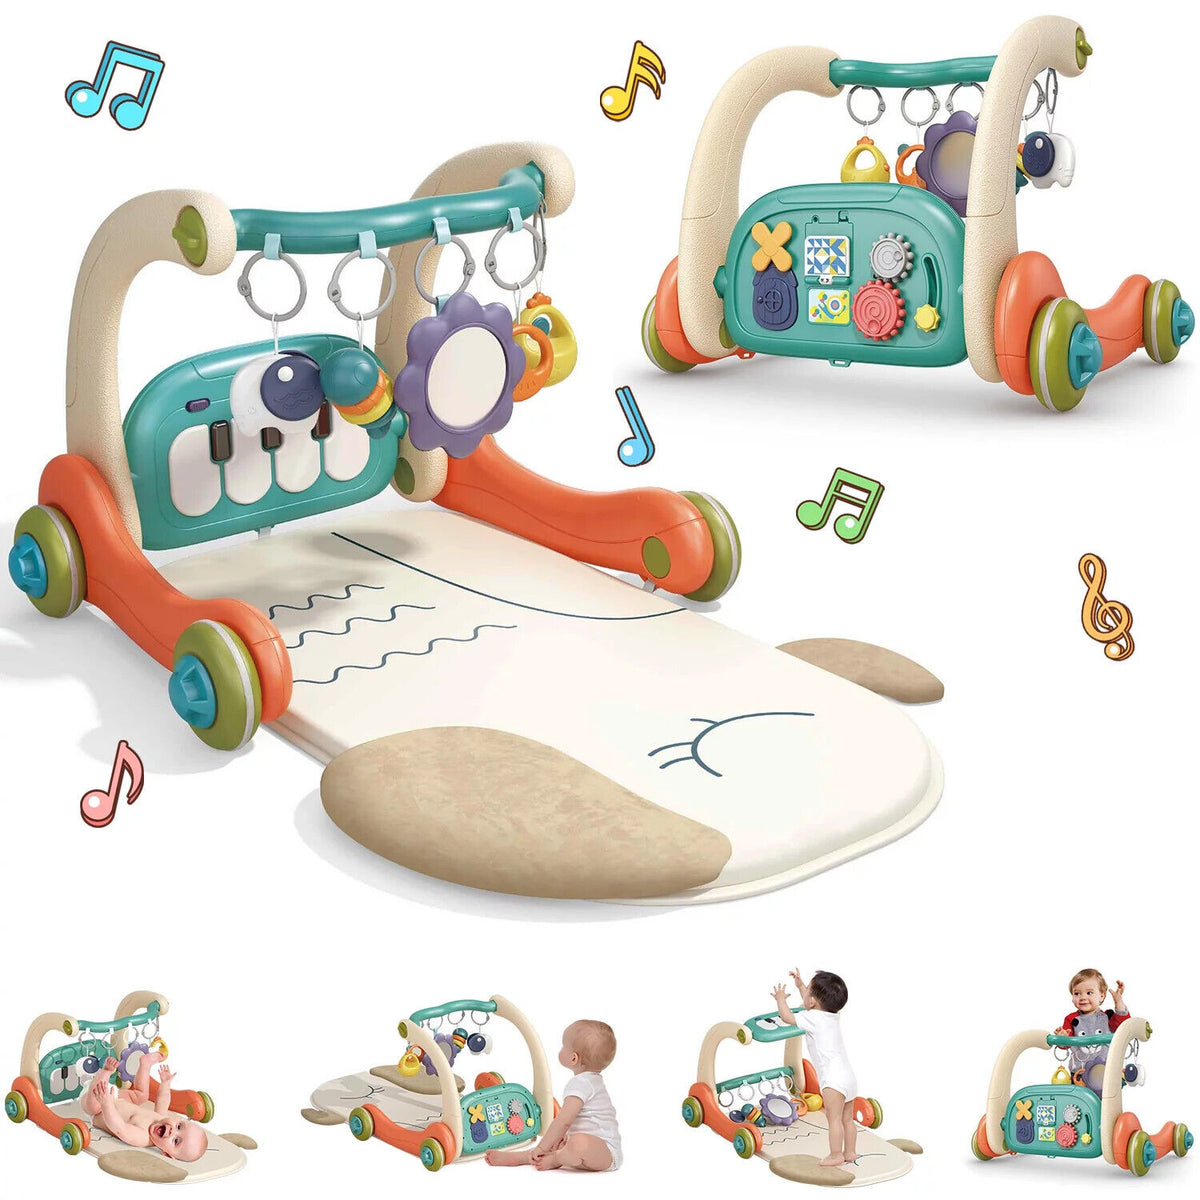 3 in 1 Baby Play Mat and Piano Activity Gym for Newborn Babies and Toddlers